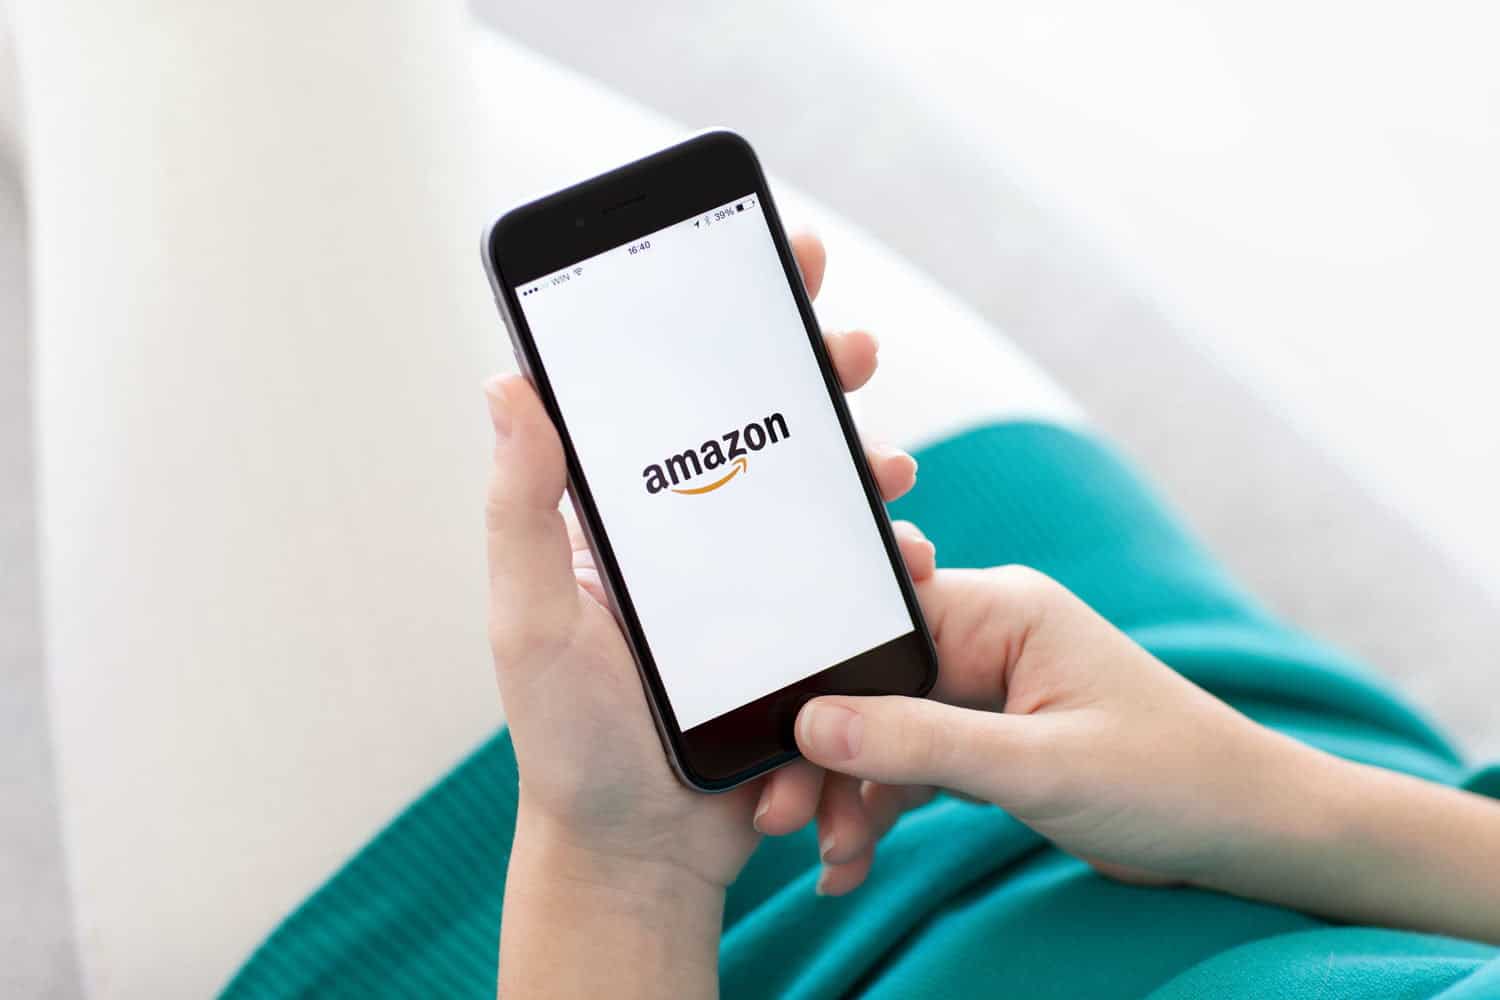 The environmental impact of hitting ‘Buy Now’ during Amazon Prime Day